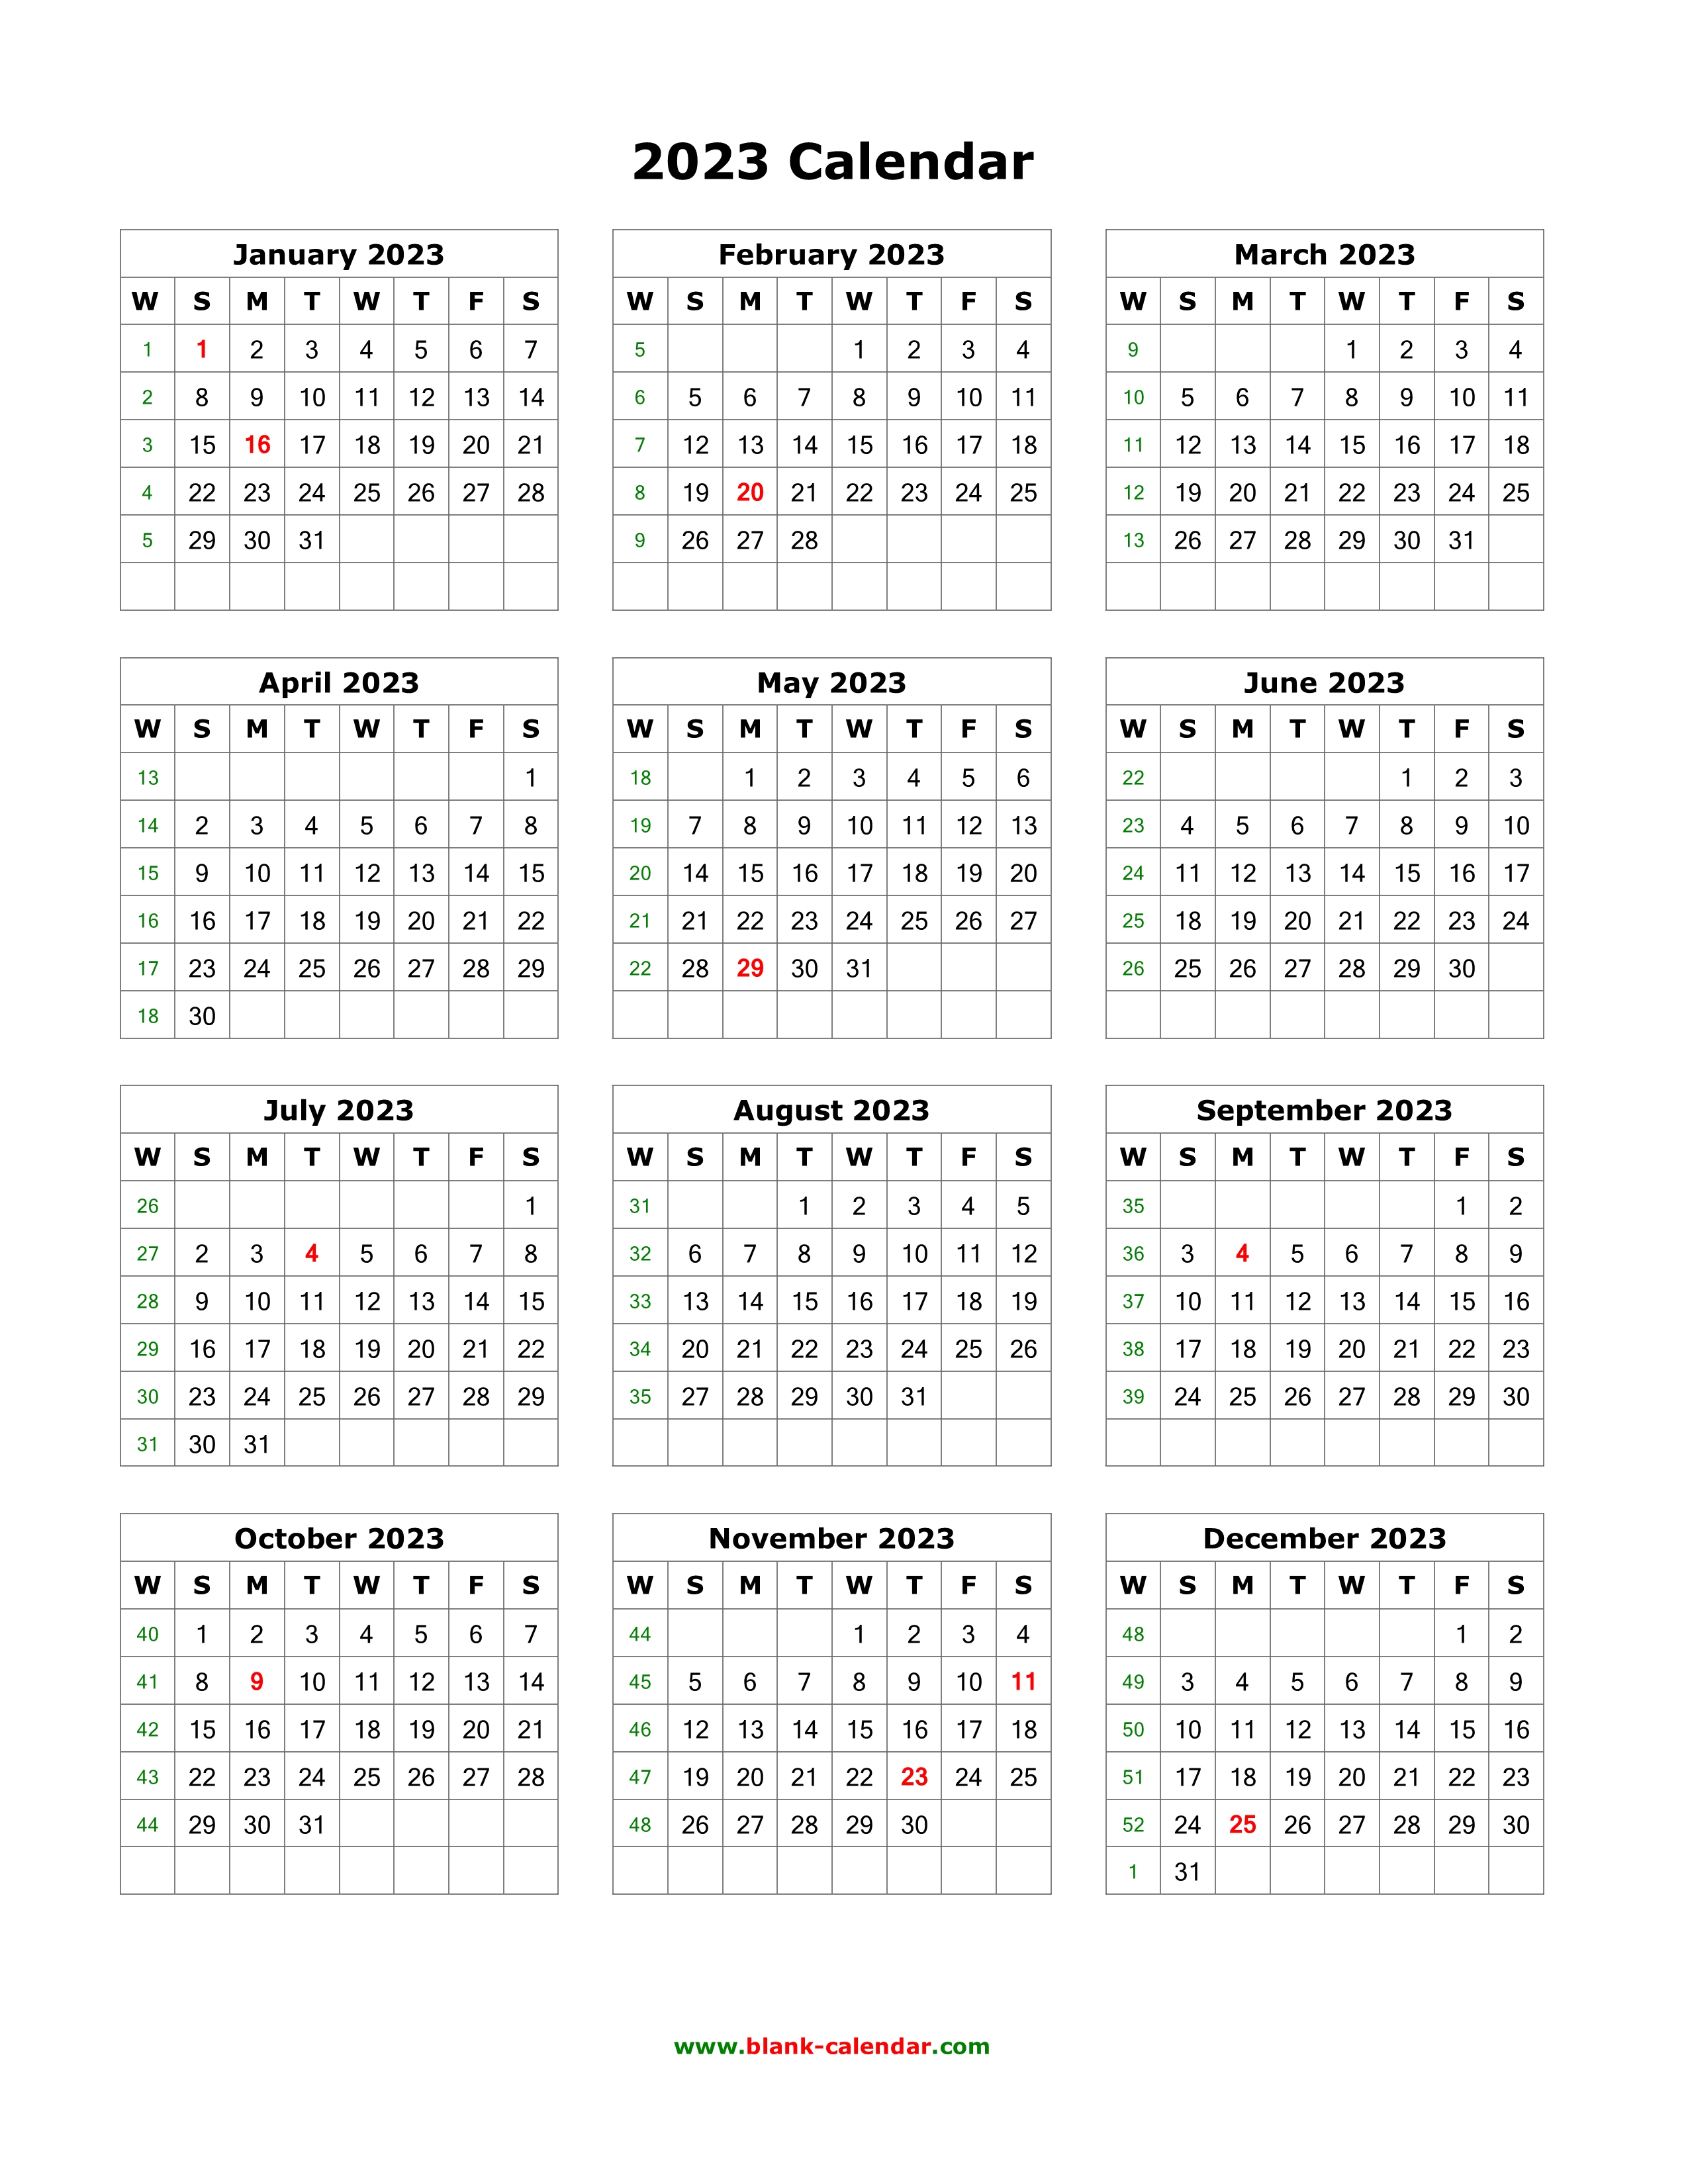 download-blank-calendar-2023-12-months-on-one-page-vertical-free-nude